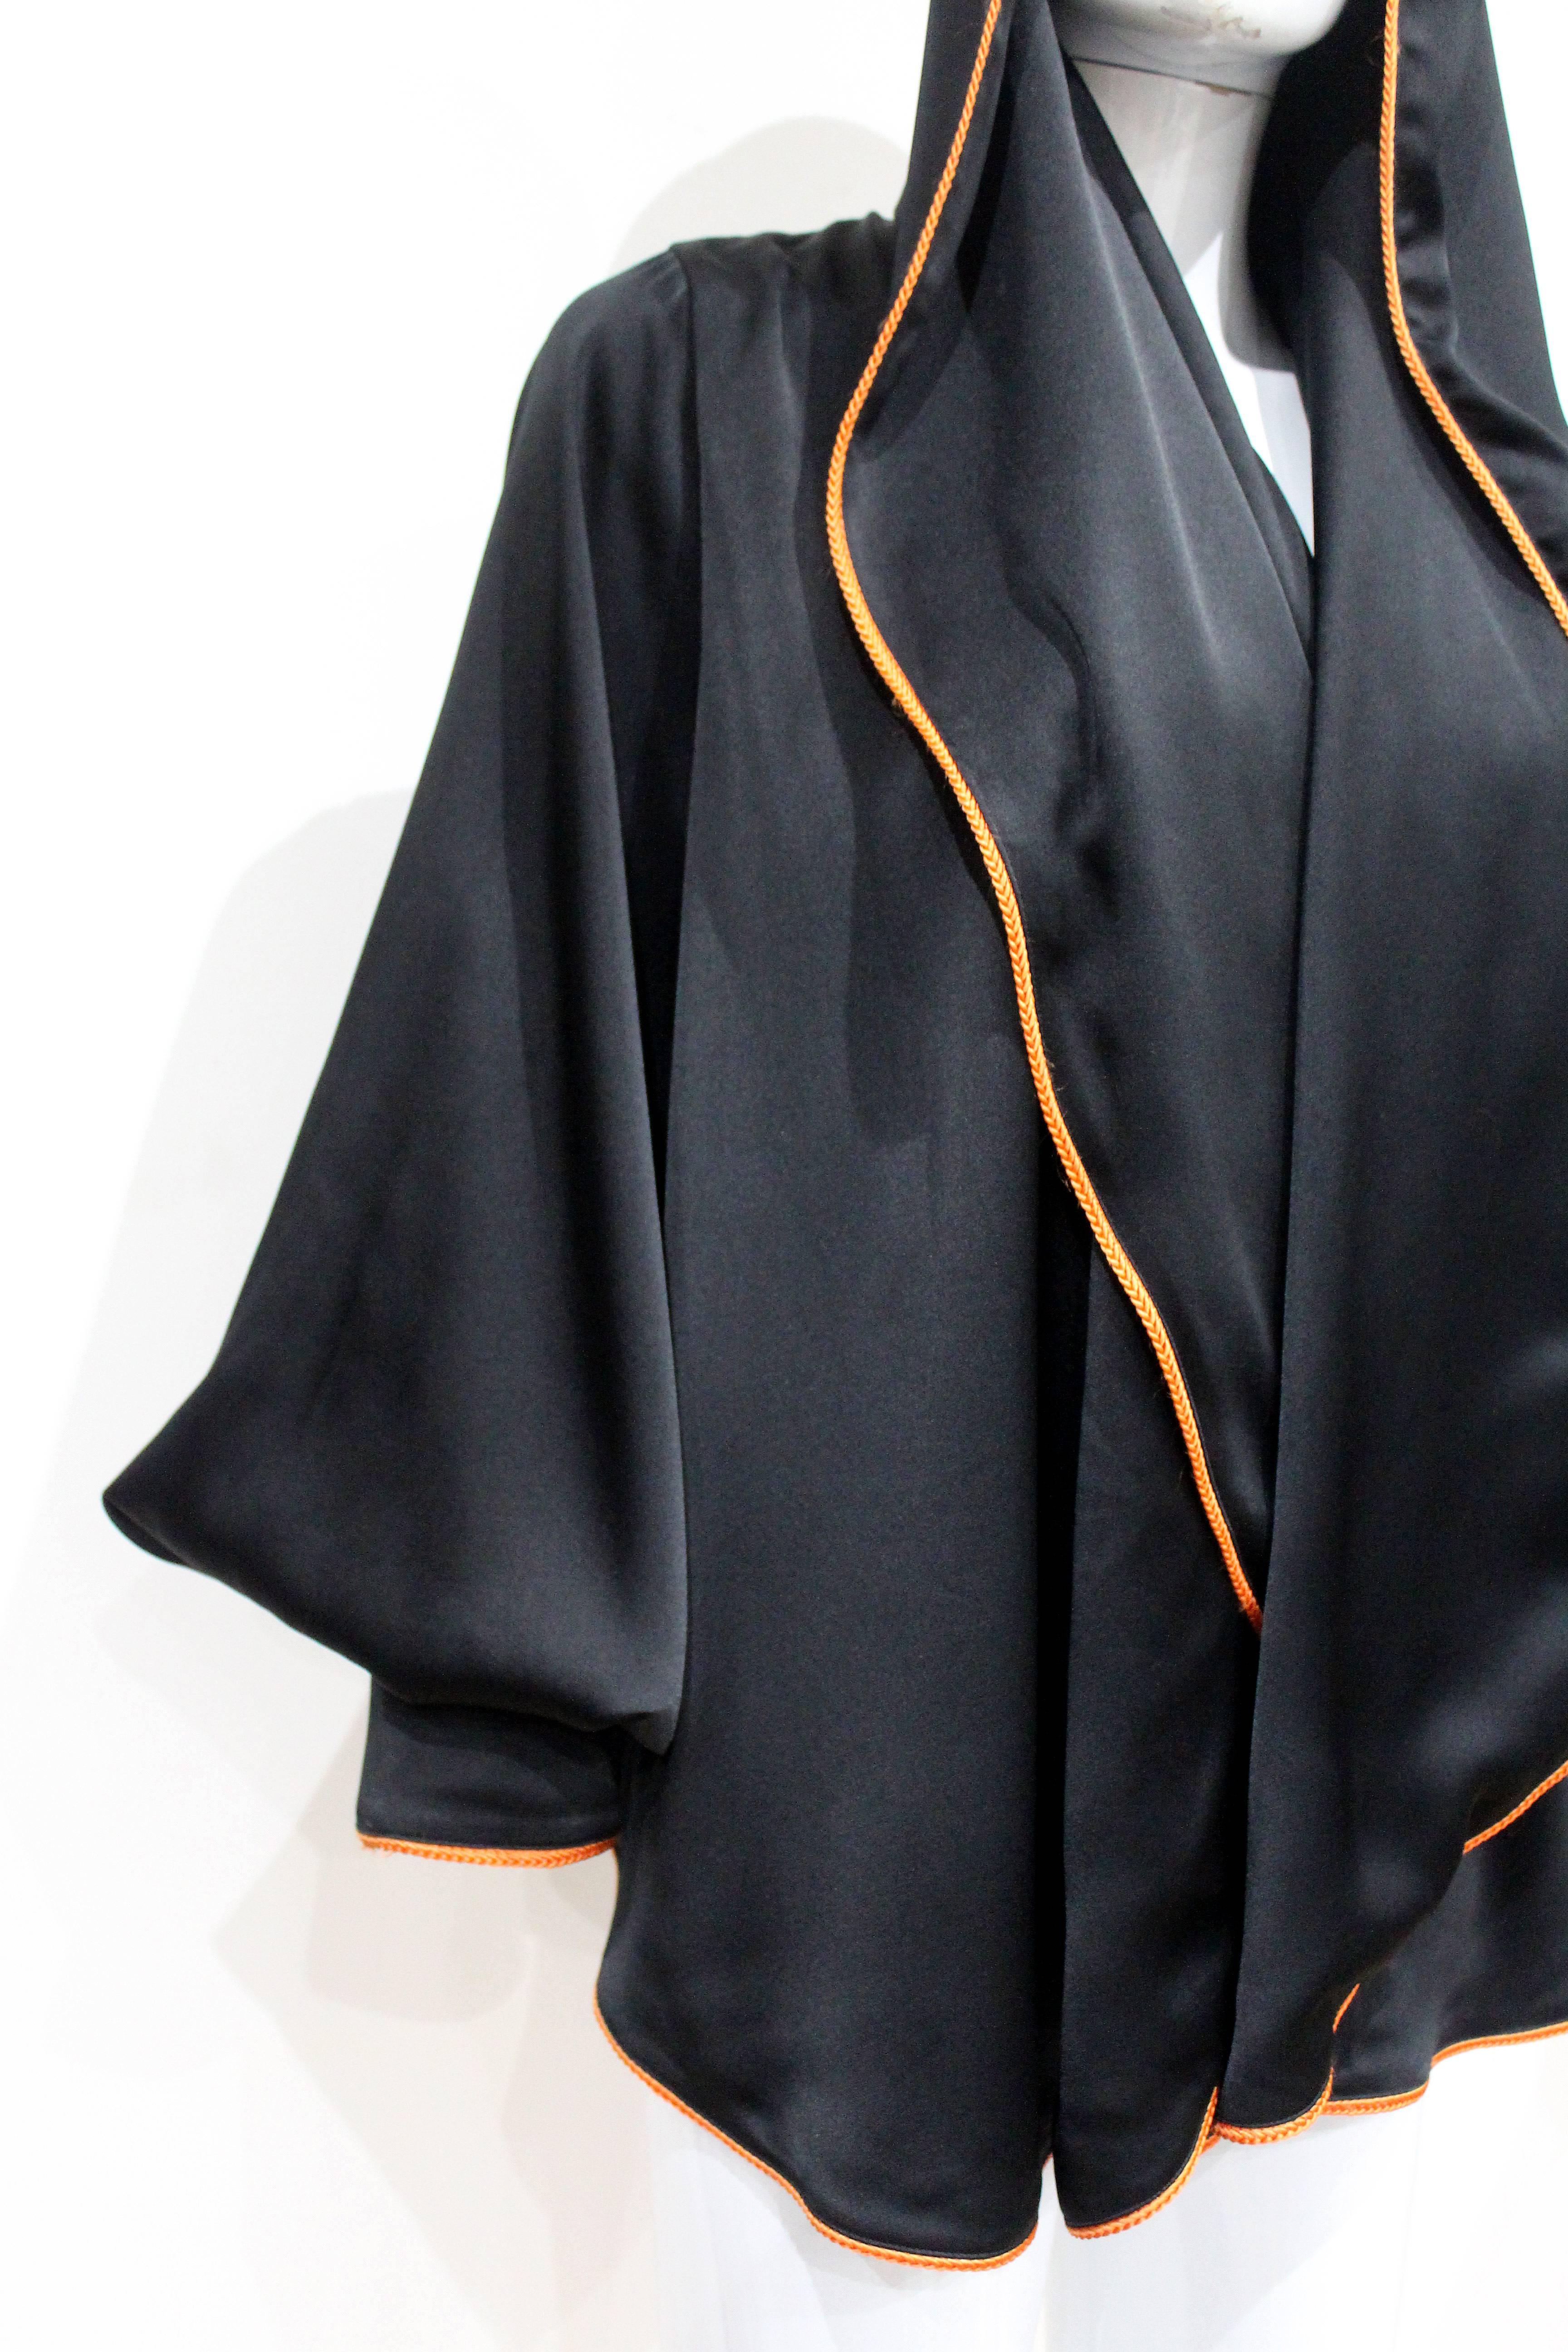 A stylish Vivienne Westwood black evening jacket with orange braided trim. The jacket can be styled with a hood and has billowing poet sleeves. No closure. One Size:

Excellent Condition